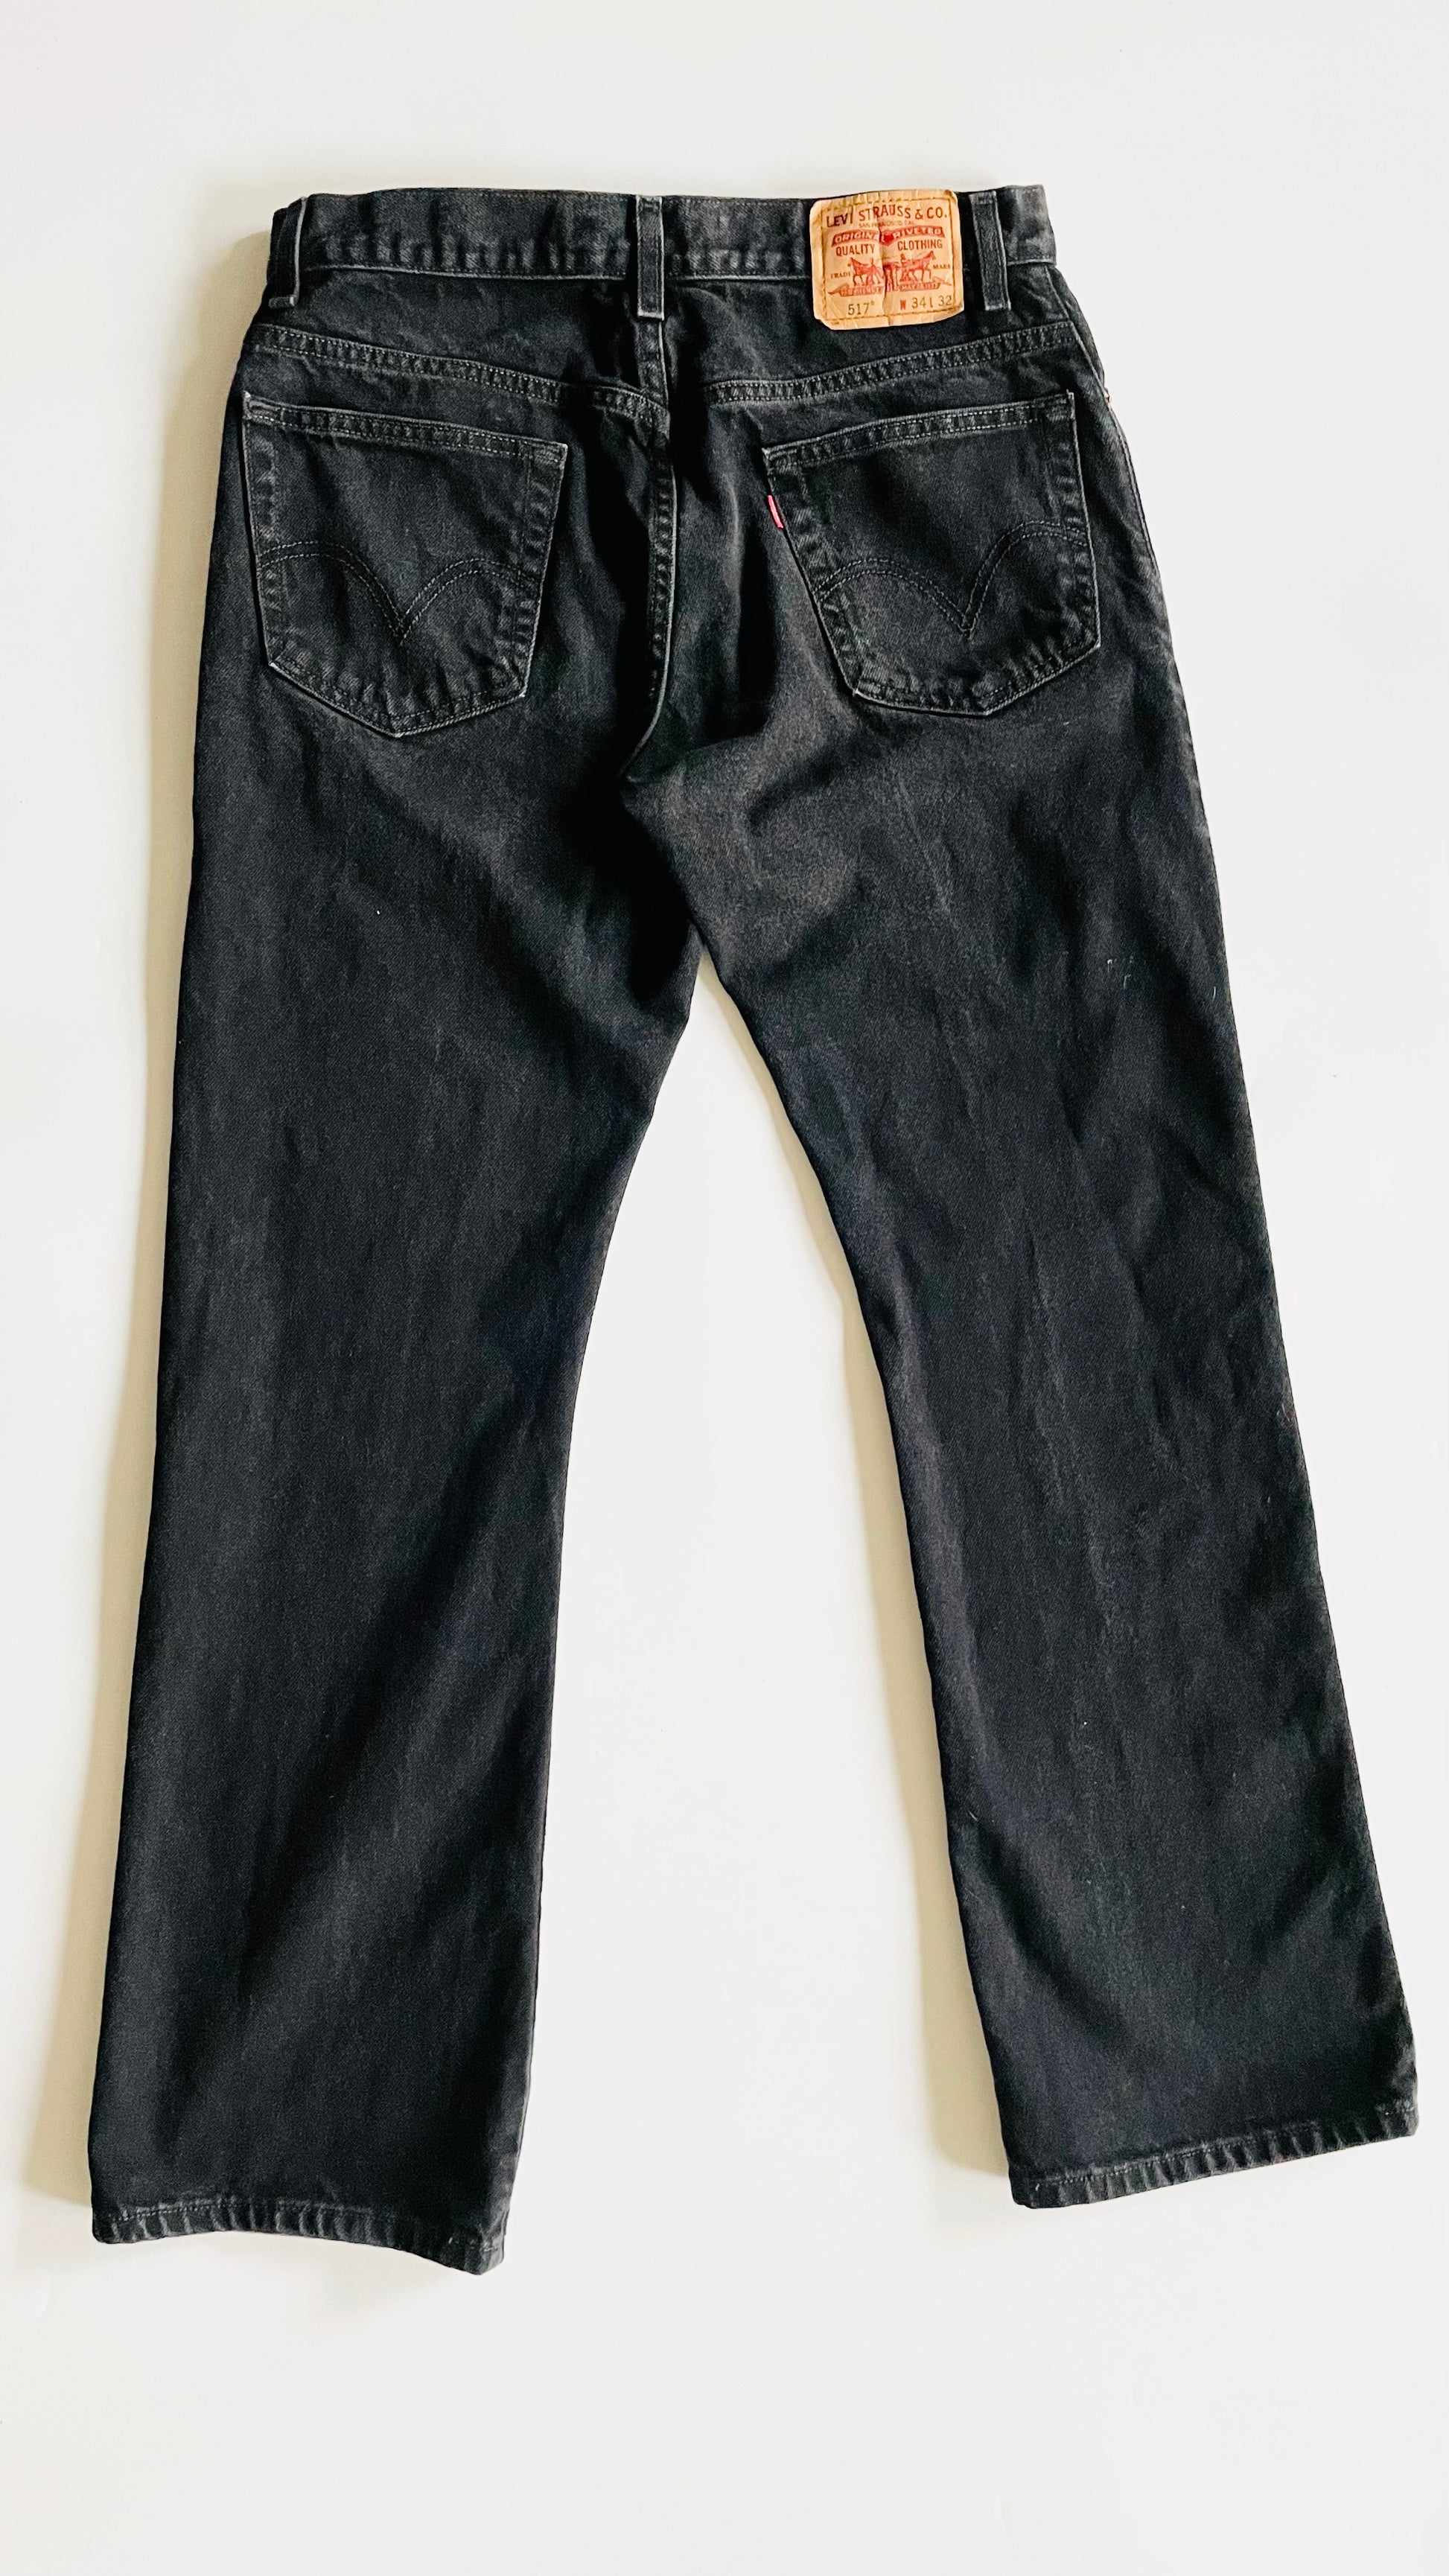 Pre-Loved Levis 517s black boot cut jeans - Size 34 x 32